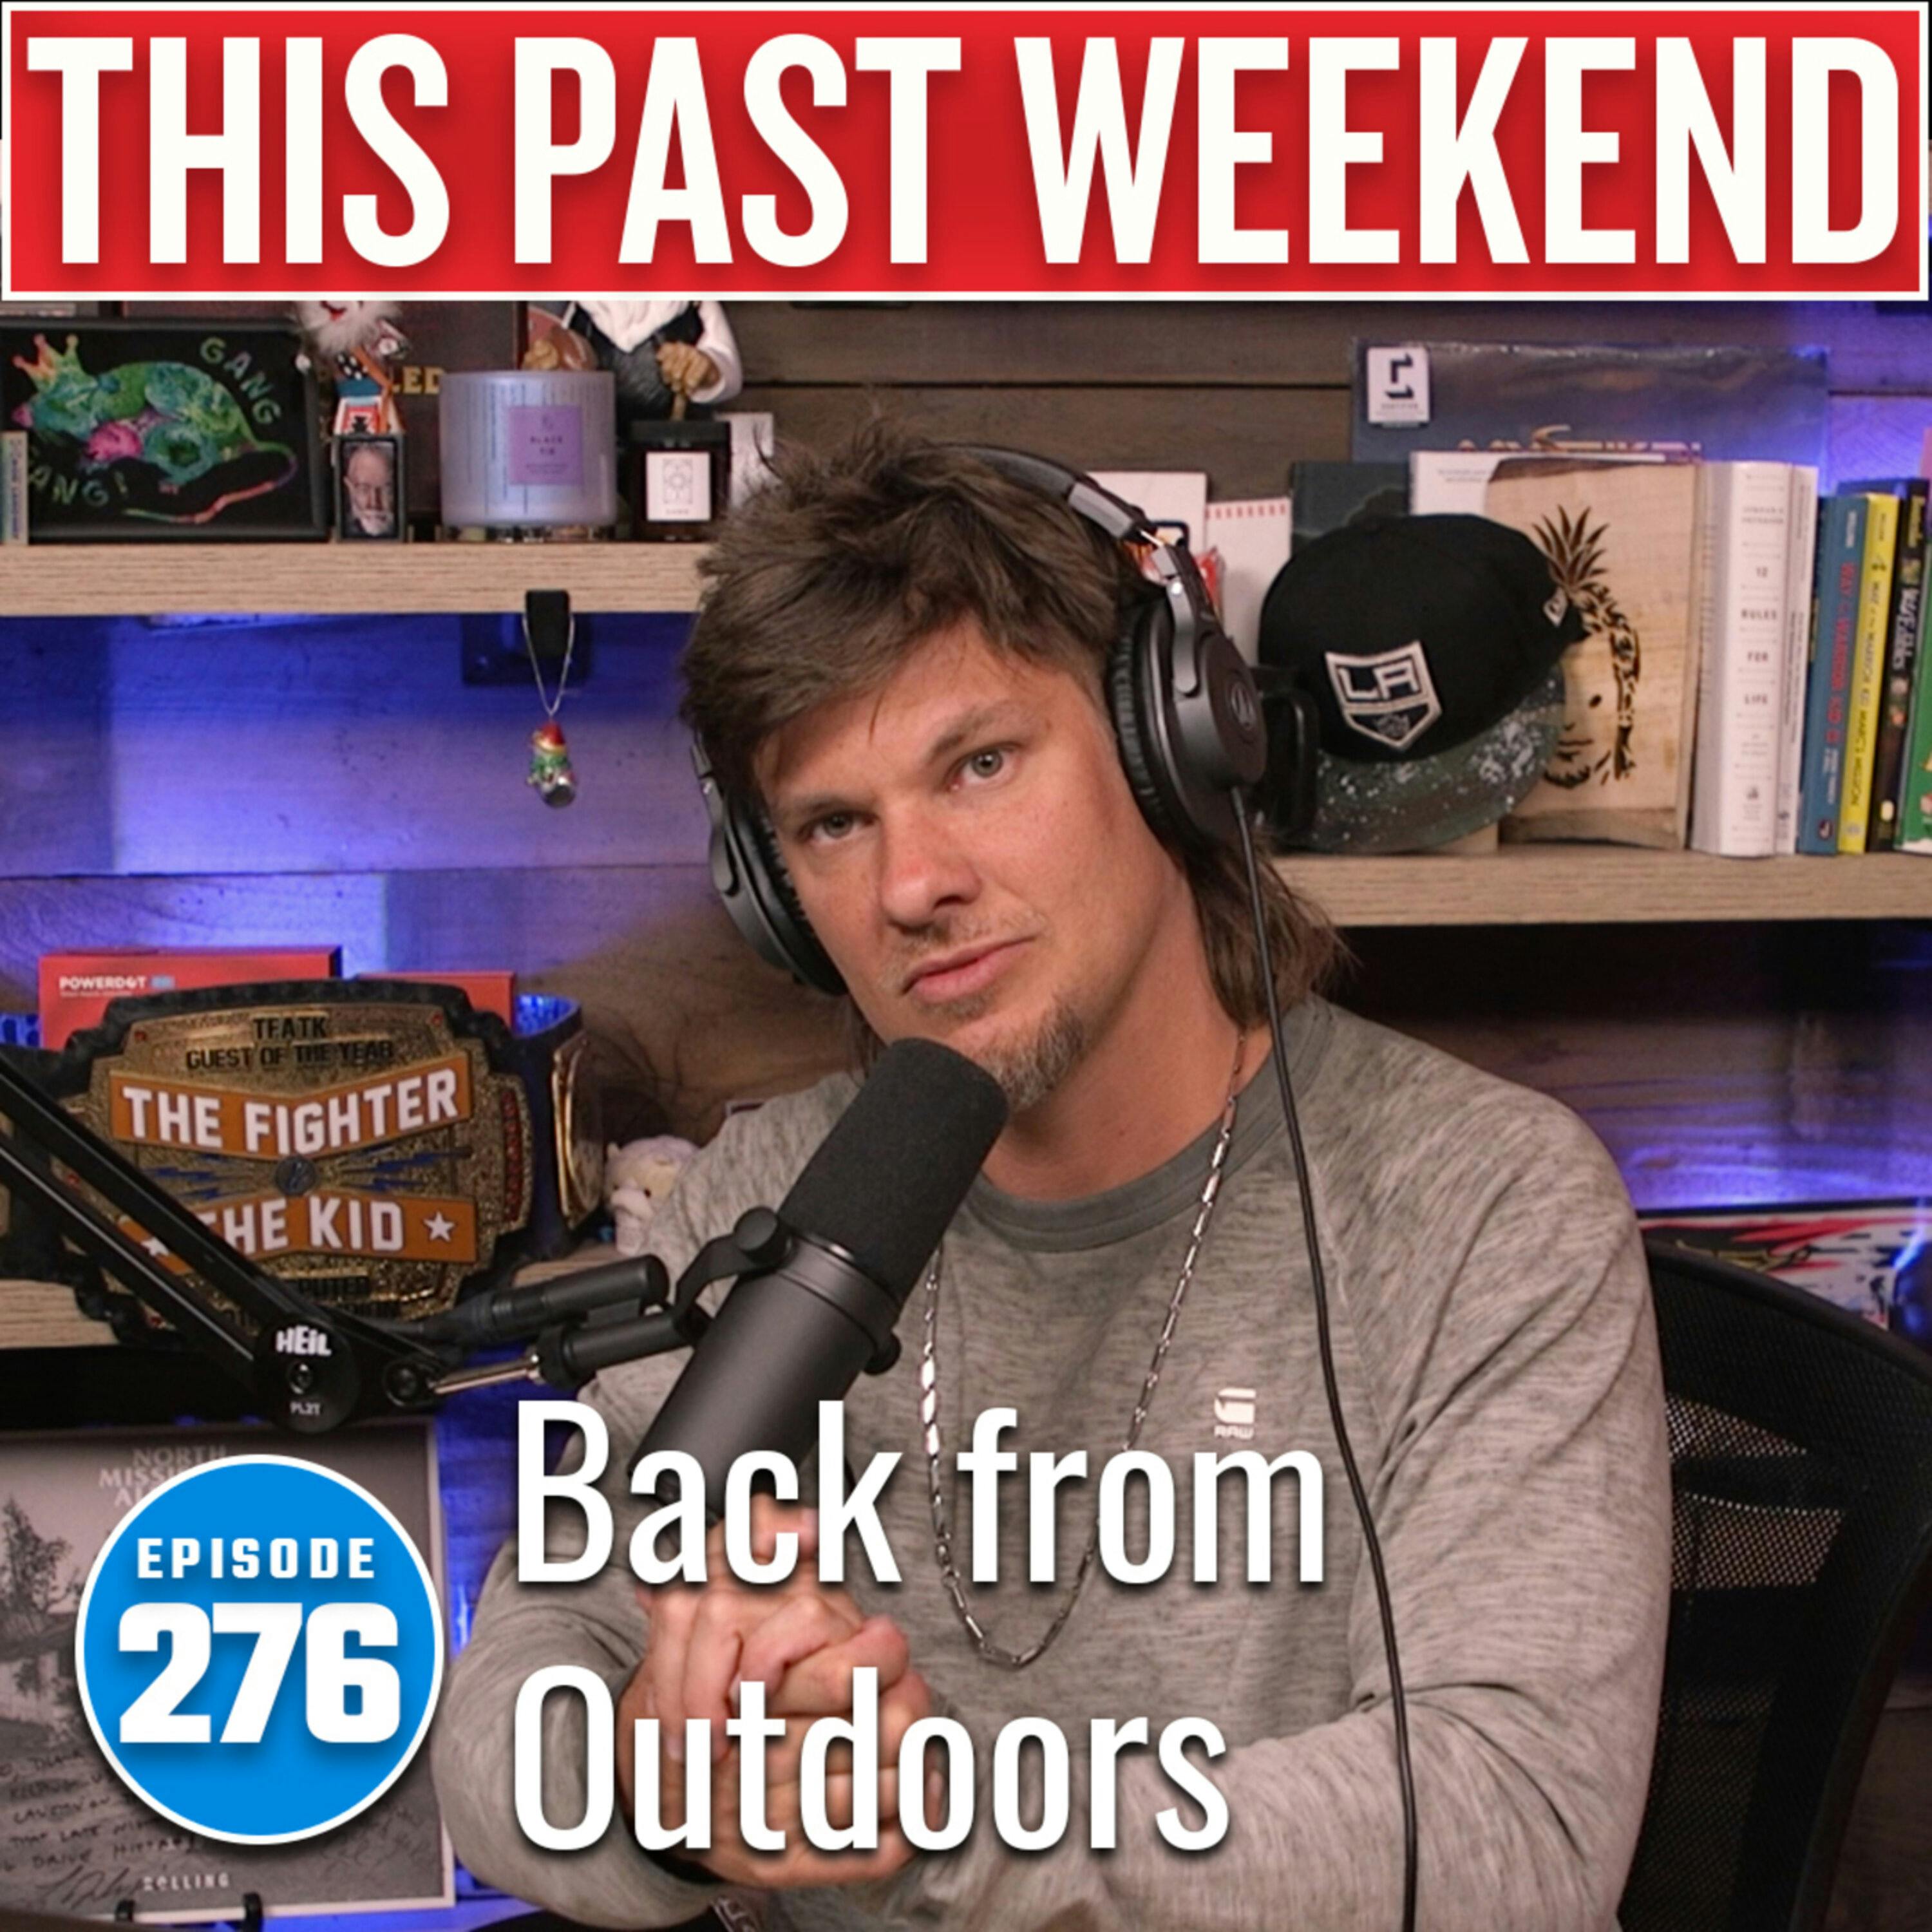 Back from Outdoors | This Past Weekend w/ Theo Von #276 by Theo Von